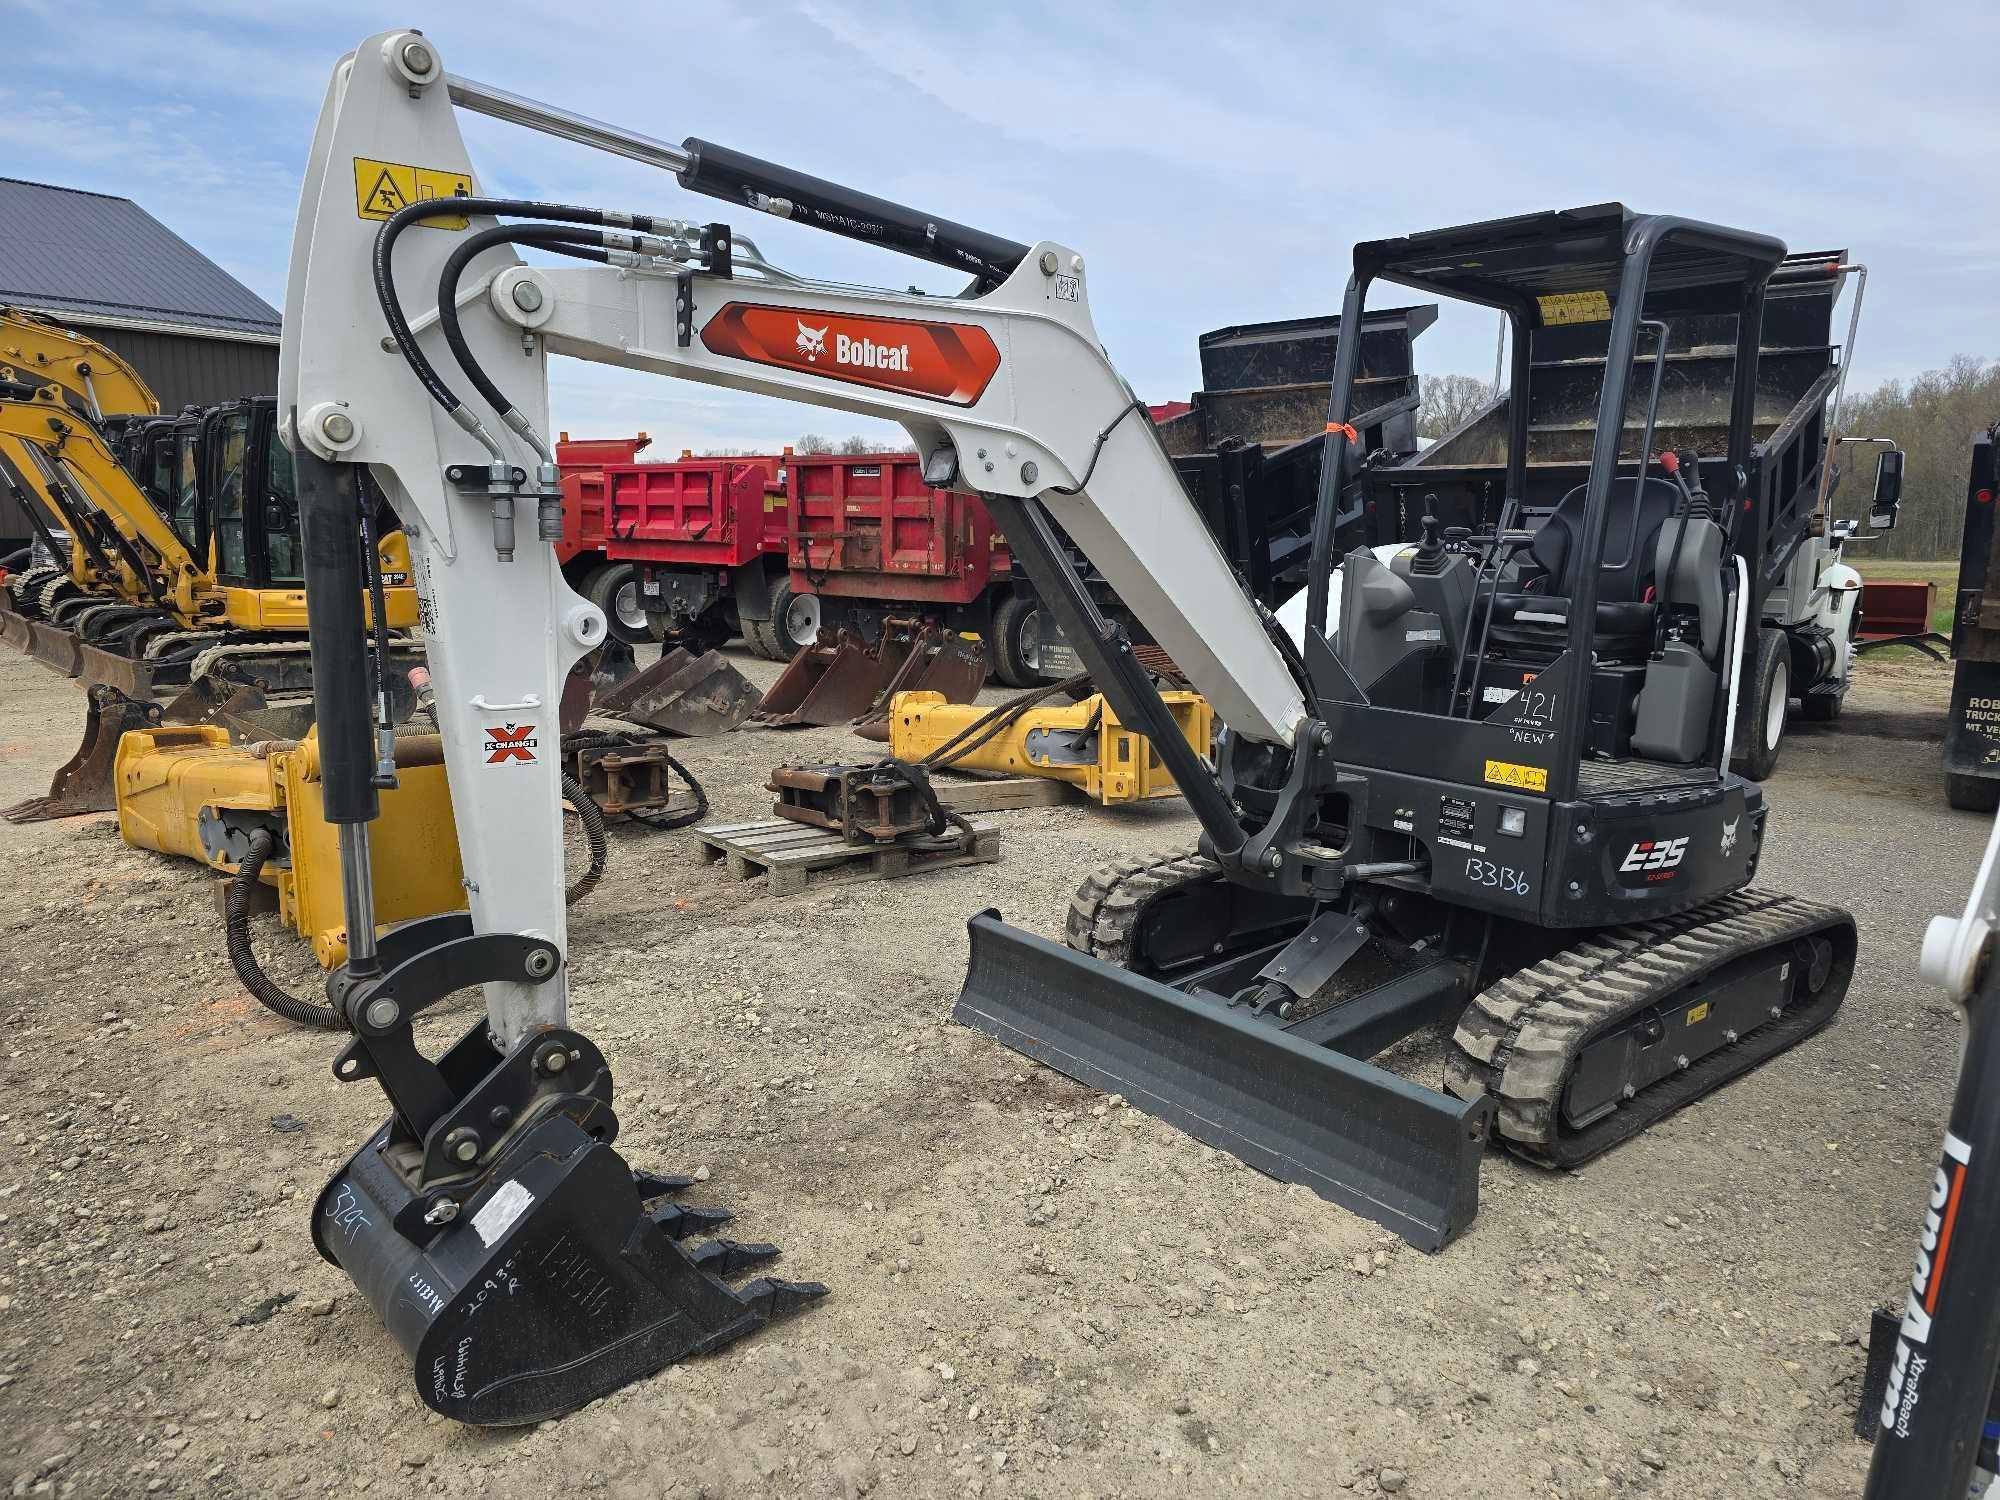 2023 BOBCAT E35 HYDRAULIC EXCAVATOR SN-914493 powered by diesel engine, equipped with OROPS, front